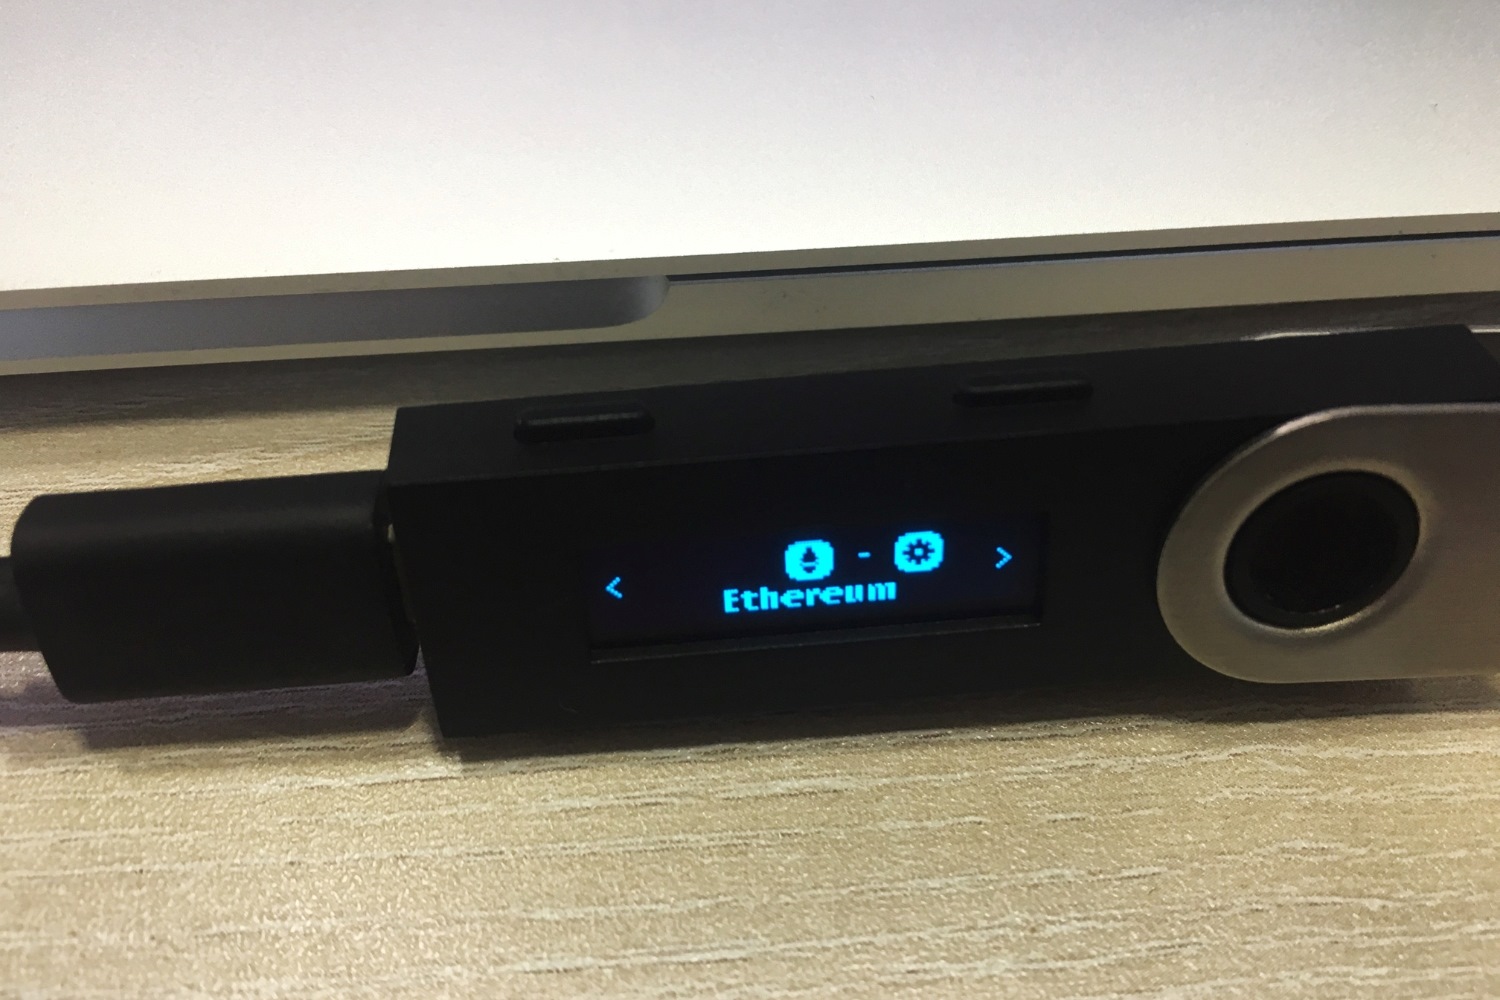 How To Get The Ethereum App To Show Up On Ledger Nano S